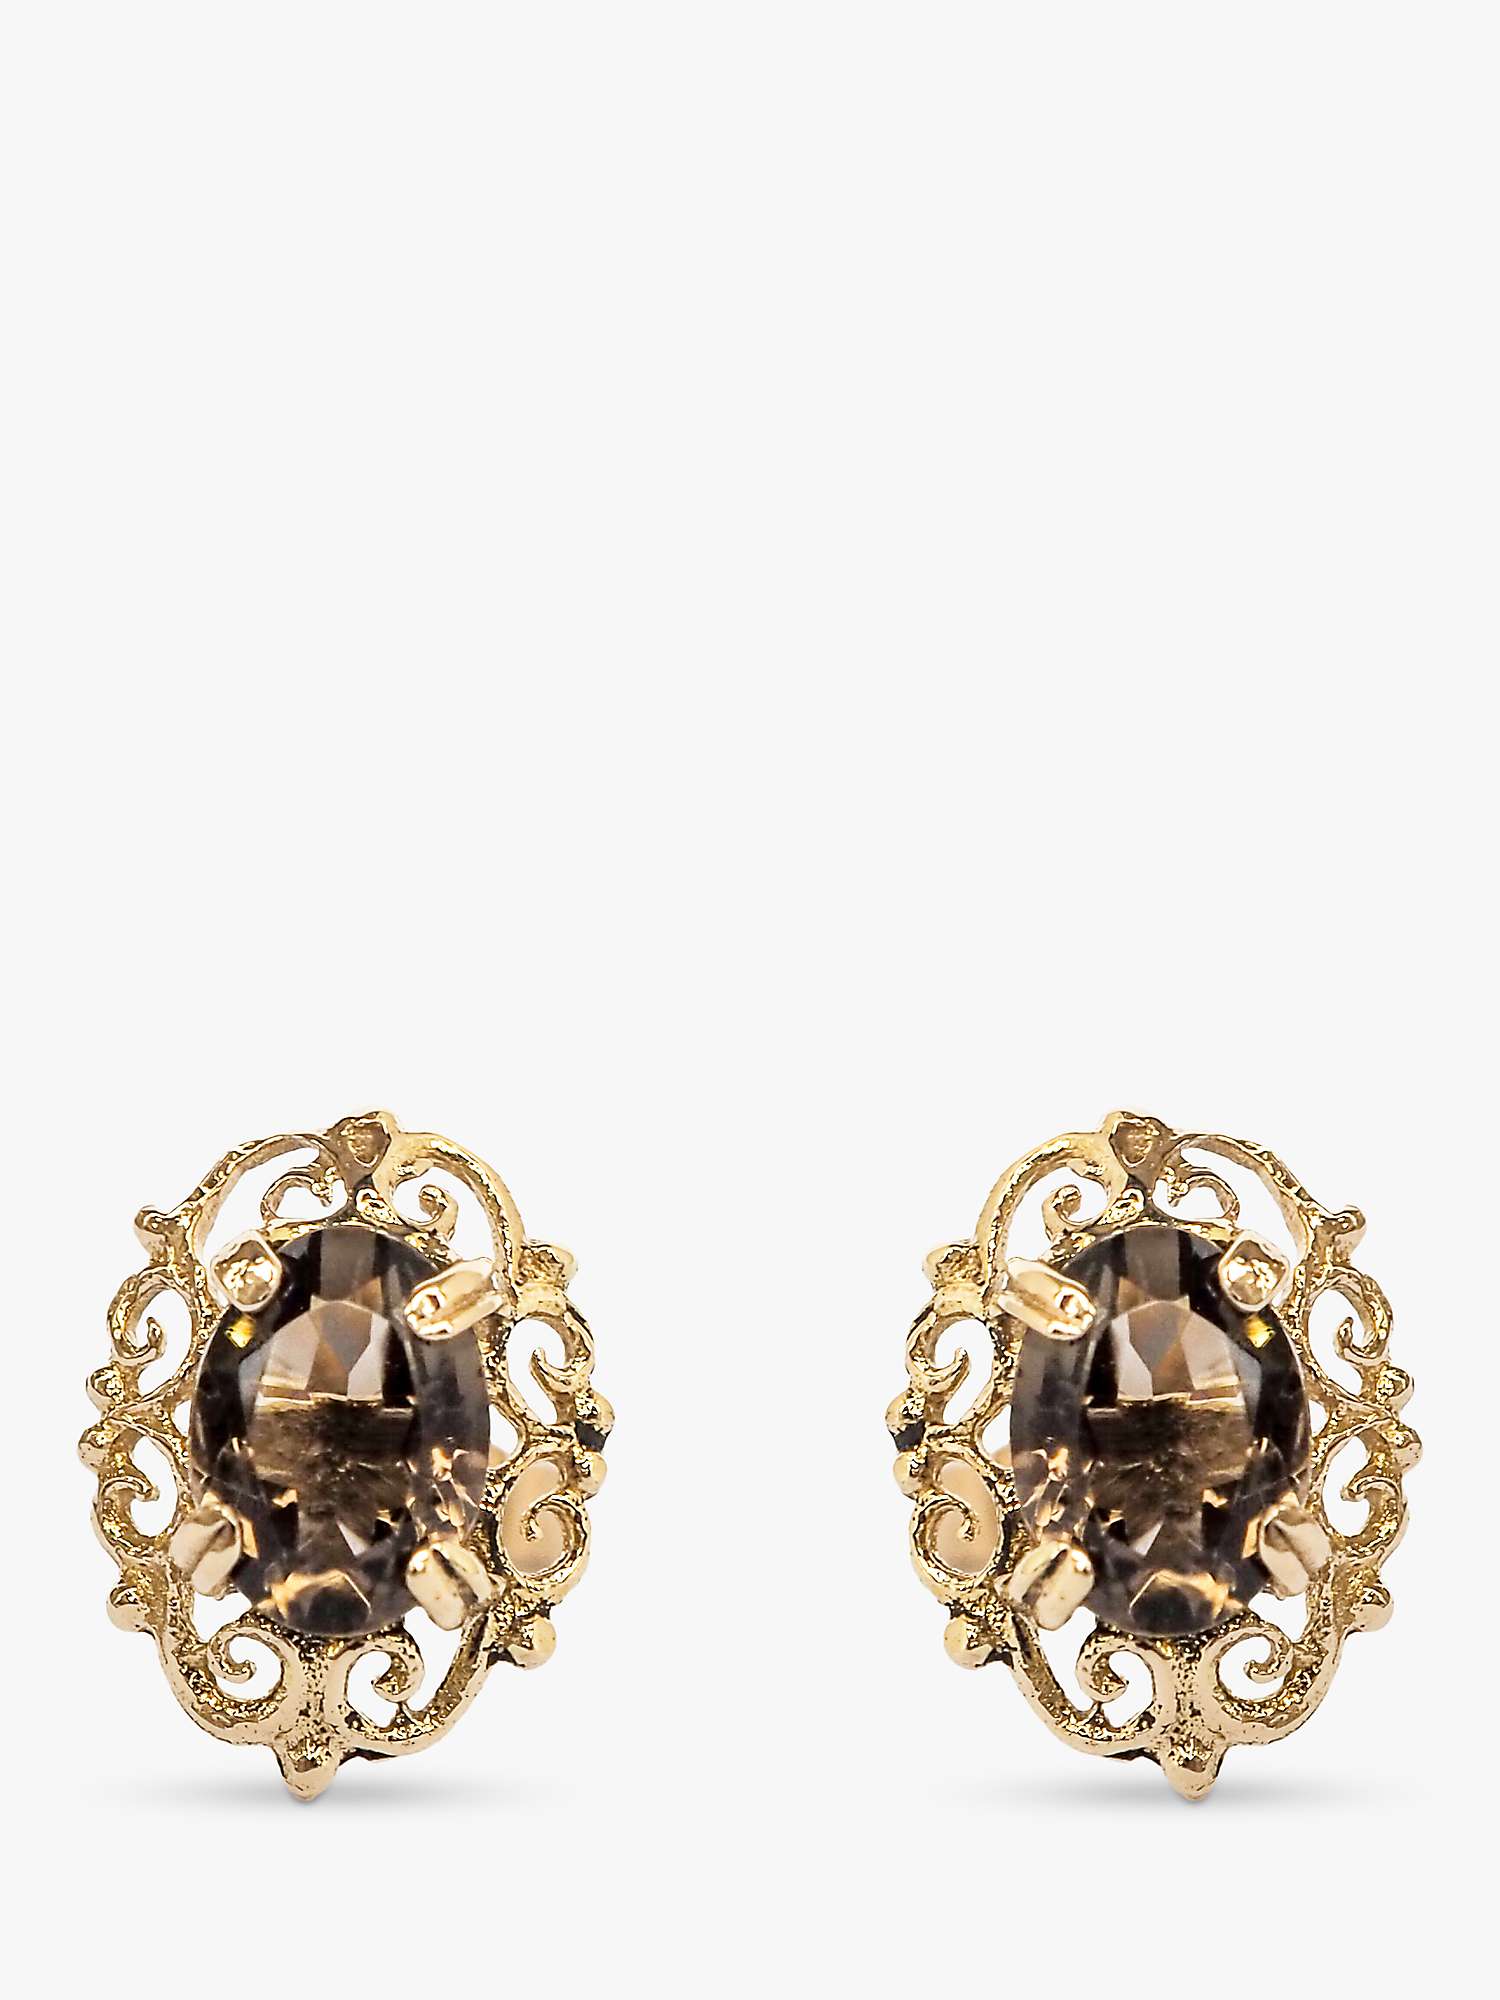 Buy L & T Heirlooms Second Hand 9ct Yellow Gold Scrollwork Citrine Stud Earrings Online at johnlewis.com